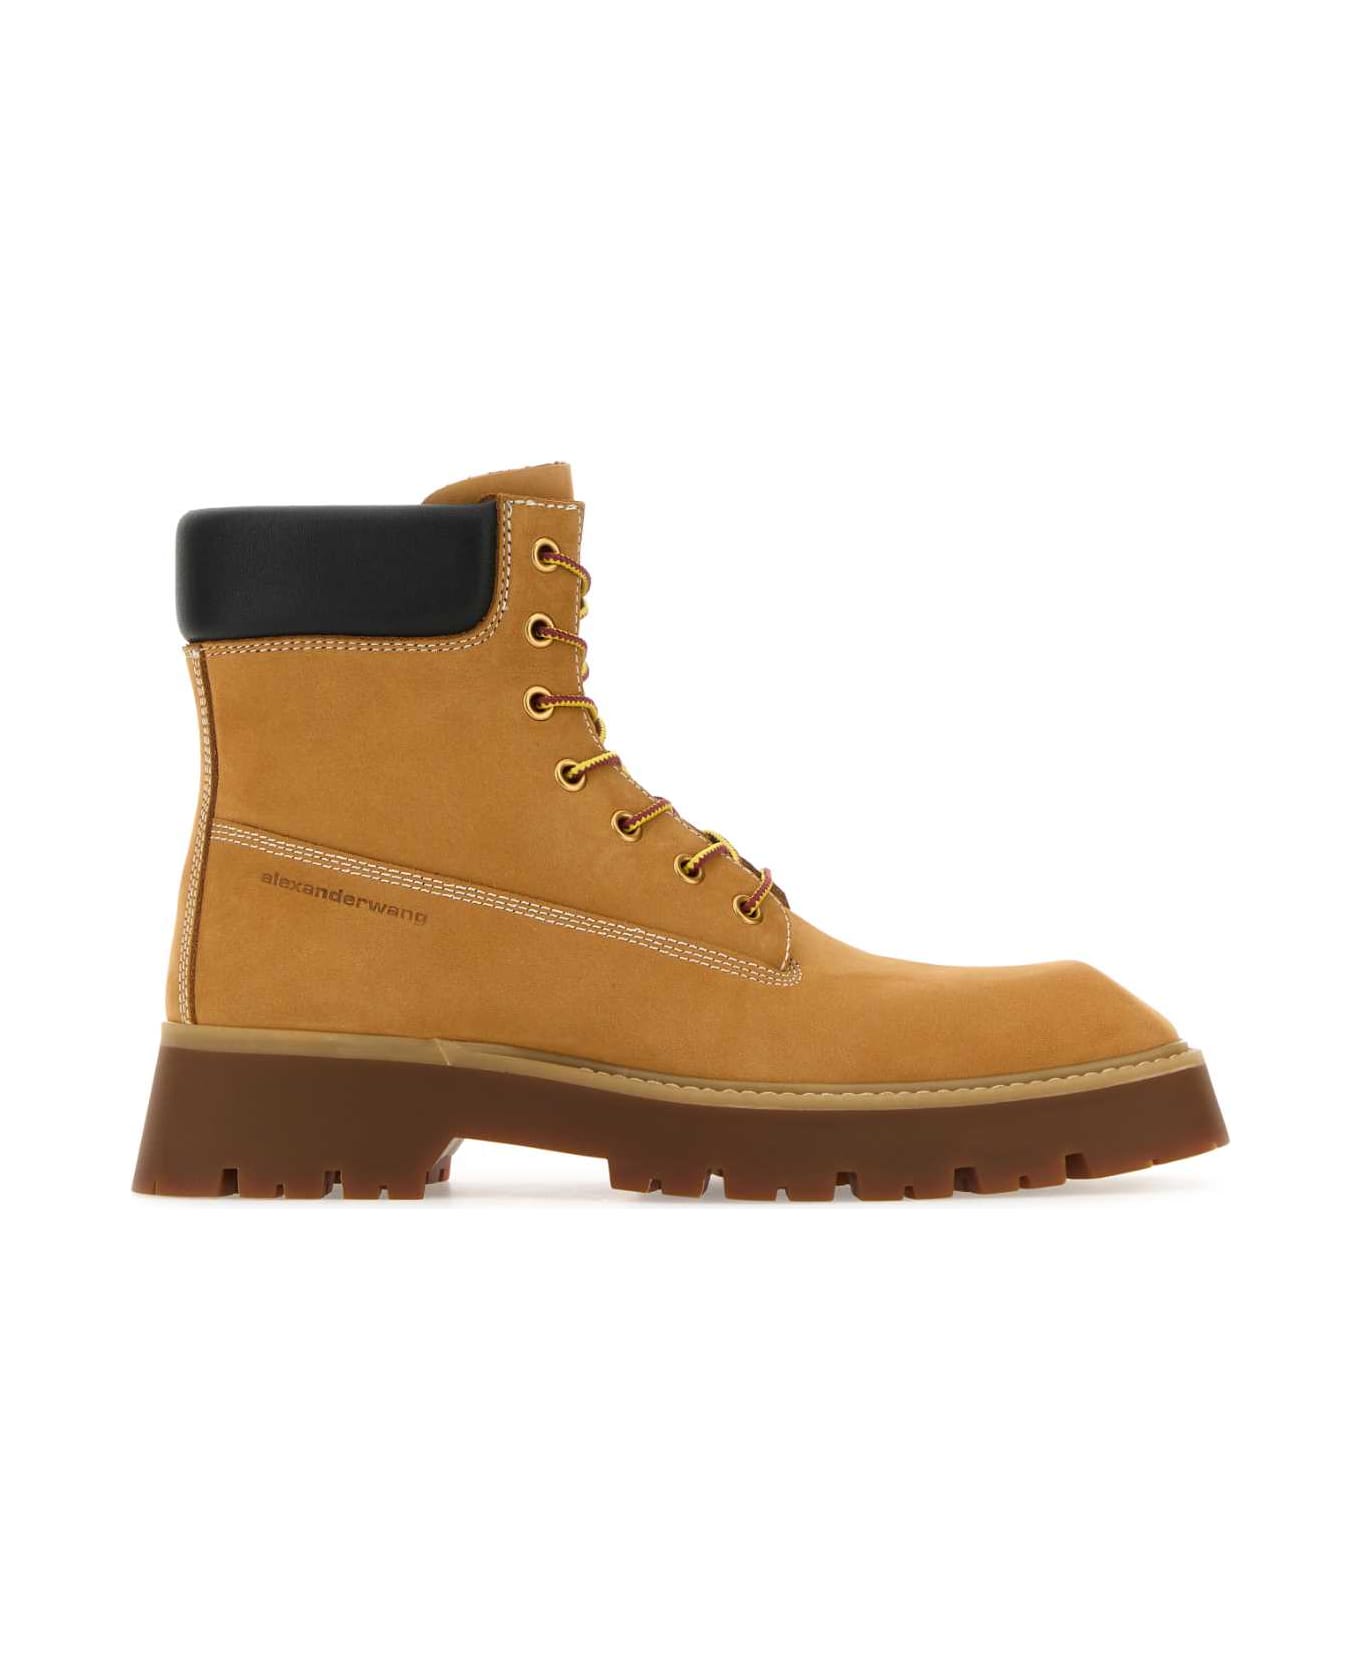 Alexander Wang Camel Suede Throttle Ankle Boots - WHEAT ブーツ